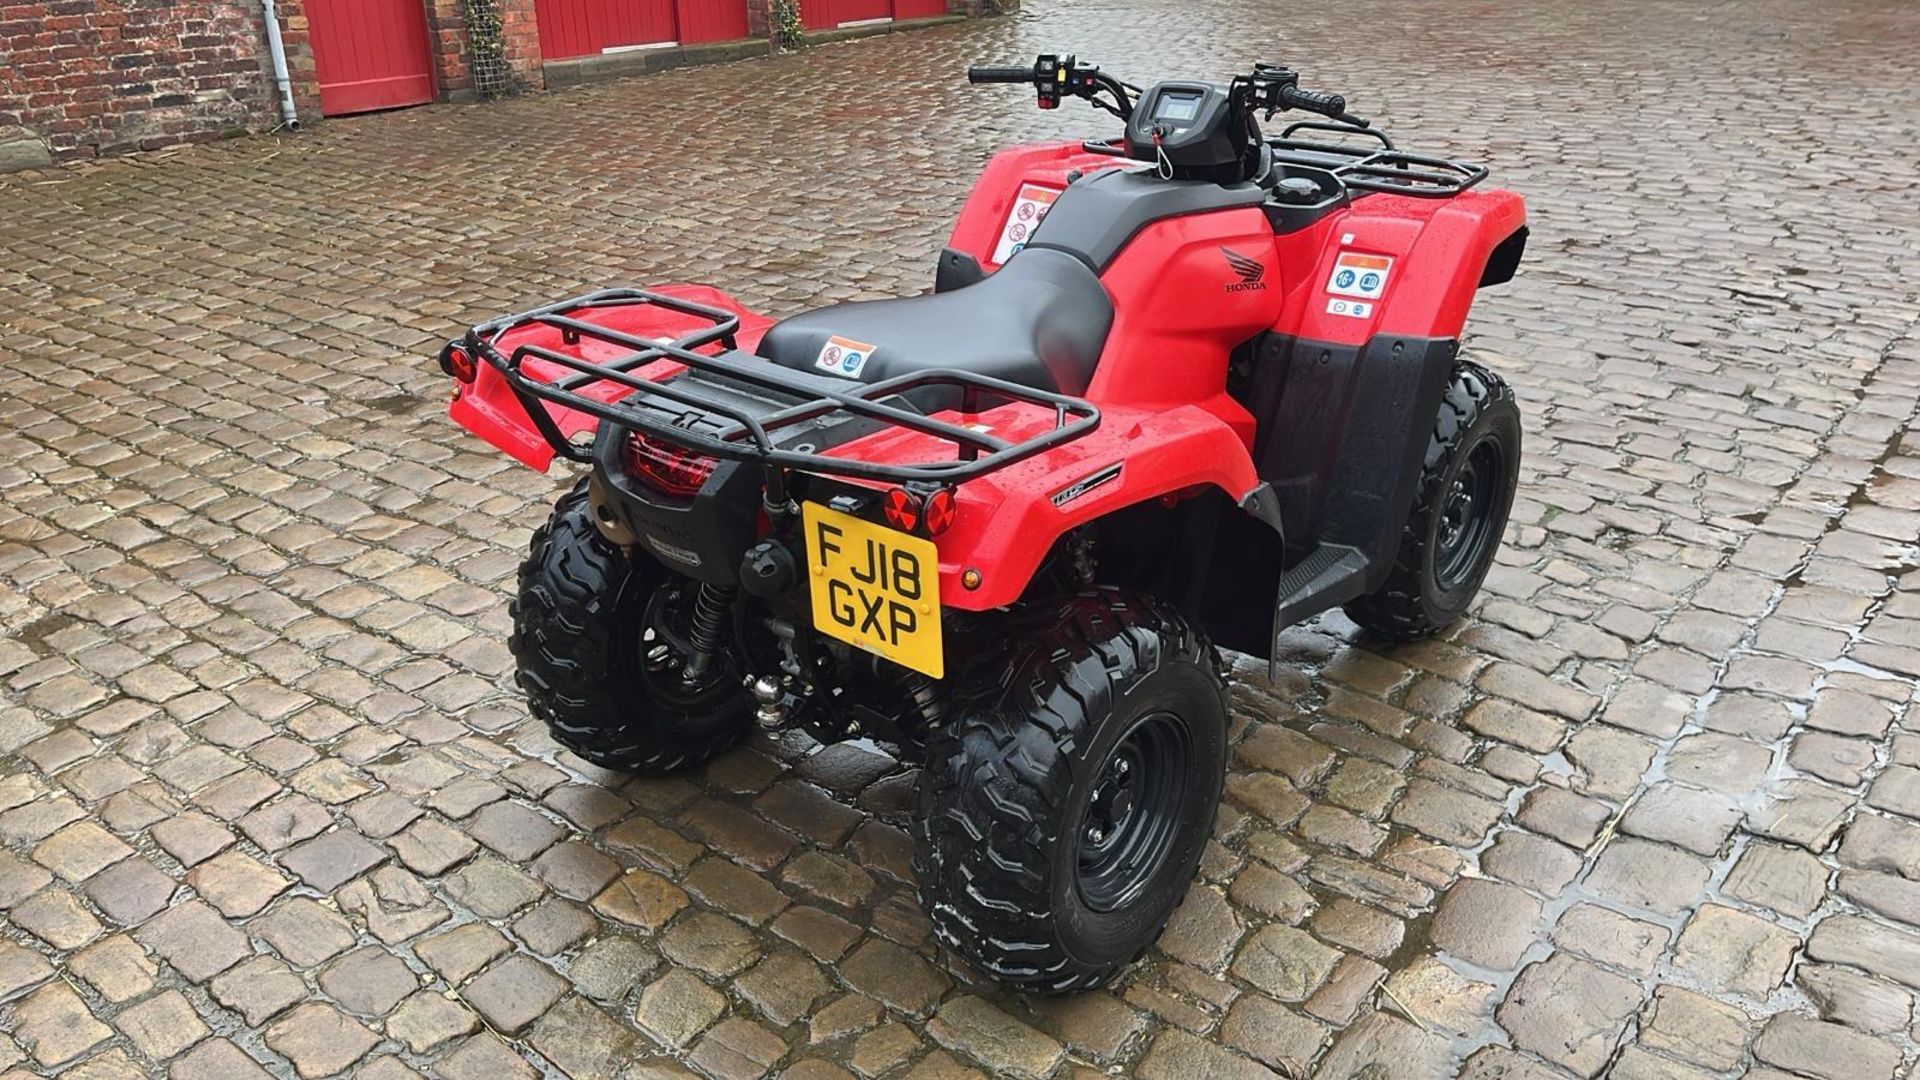 2018 HONDA TRX420FA6 FOURTRAX RANCHER AUTOMATIC DCT QUAD BIKE CAN BE SWITCED FROM 2 TO 4 WHEEL DRIVE - Image 4 of 21